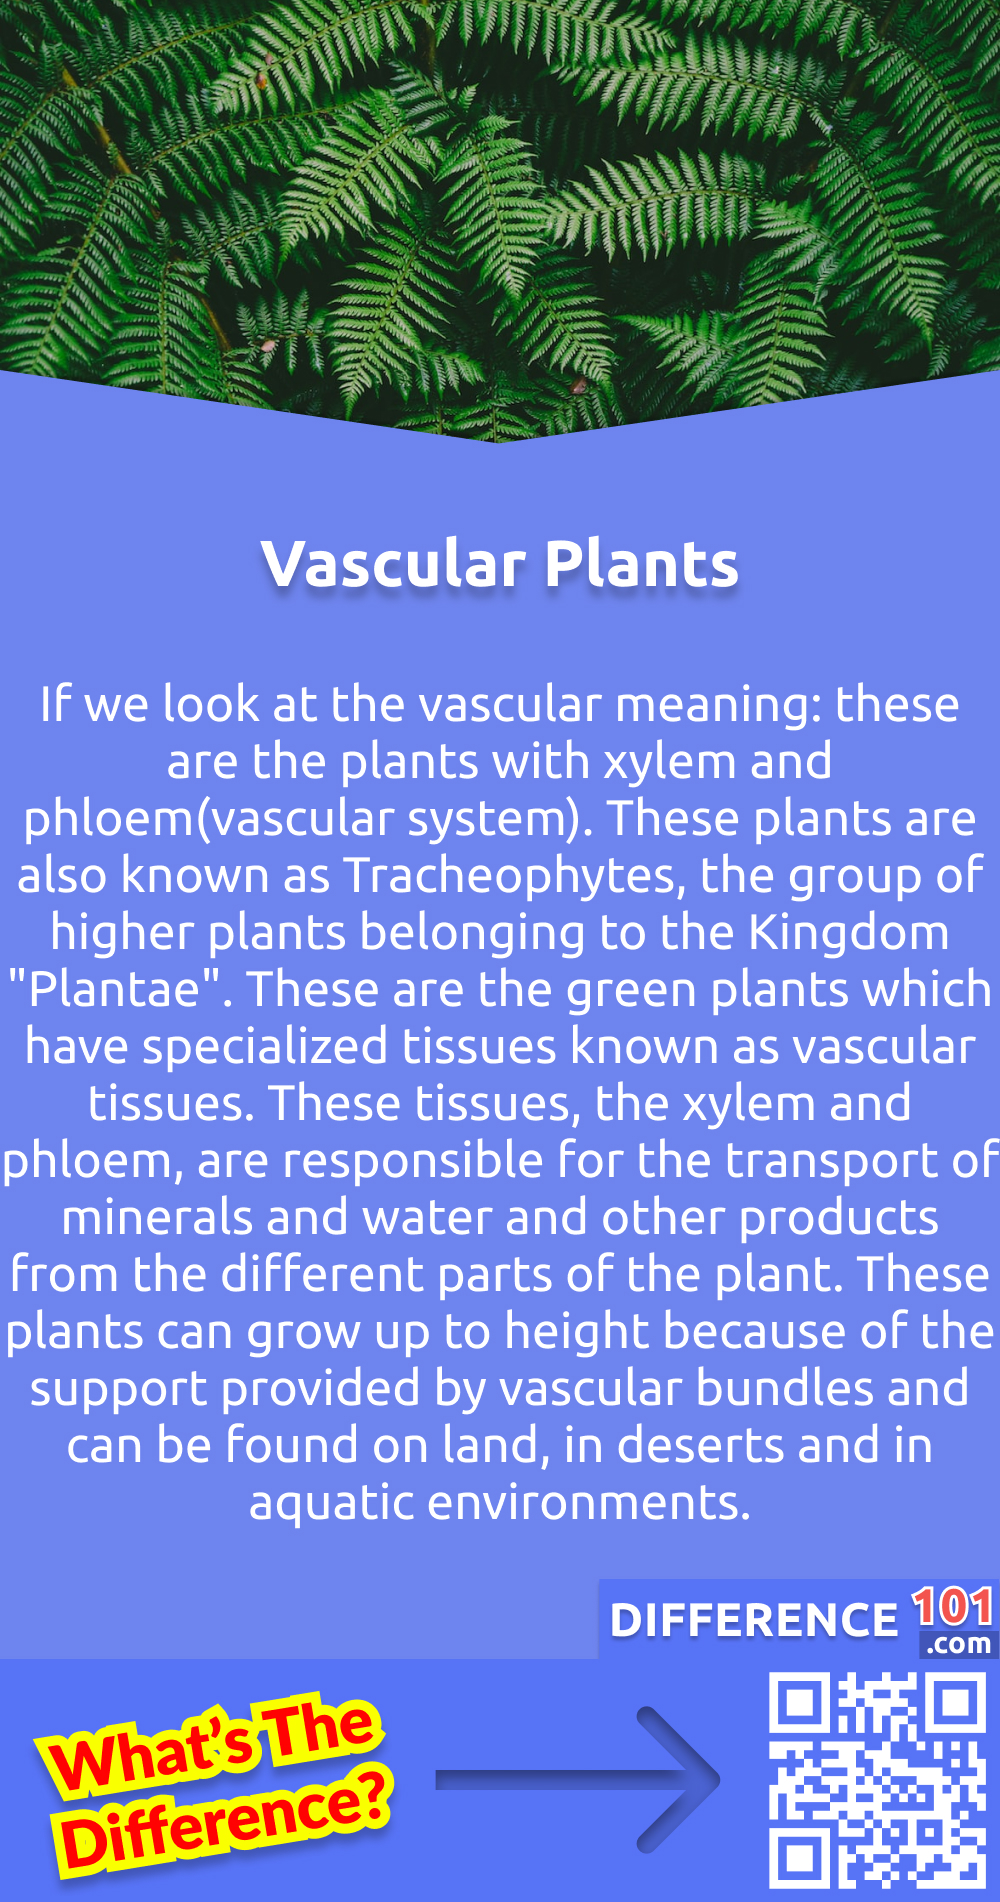 What Are Vascular Plants? If we look at the vascular meaning: these are the plants with xylem and phloem(vascular system). These plants are also known as Tracheophytes, the group of higher plants belonging to the Kingdom "Plantae". These are the green plants which have specialized tissues known as vascular tissues. These tissues are the specific feature of these plants, which varies them from the nonvascular plants. These tissues, the xylem and phloem, are responsible for the transport of minerals and water and other products from the different parts of the plant. These plants can grow up to height because of the support provided by vascular bundles and can be found on land, in deserts and in aquatic environments. Not only the vascular system, but these plants also have well-defined root and shoot systems. These plants also have leaves, flowers, fruit and wood.